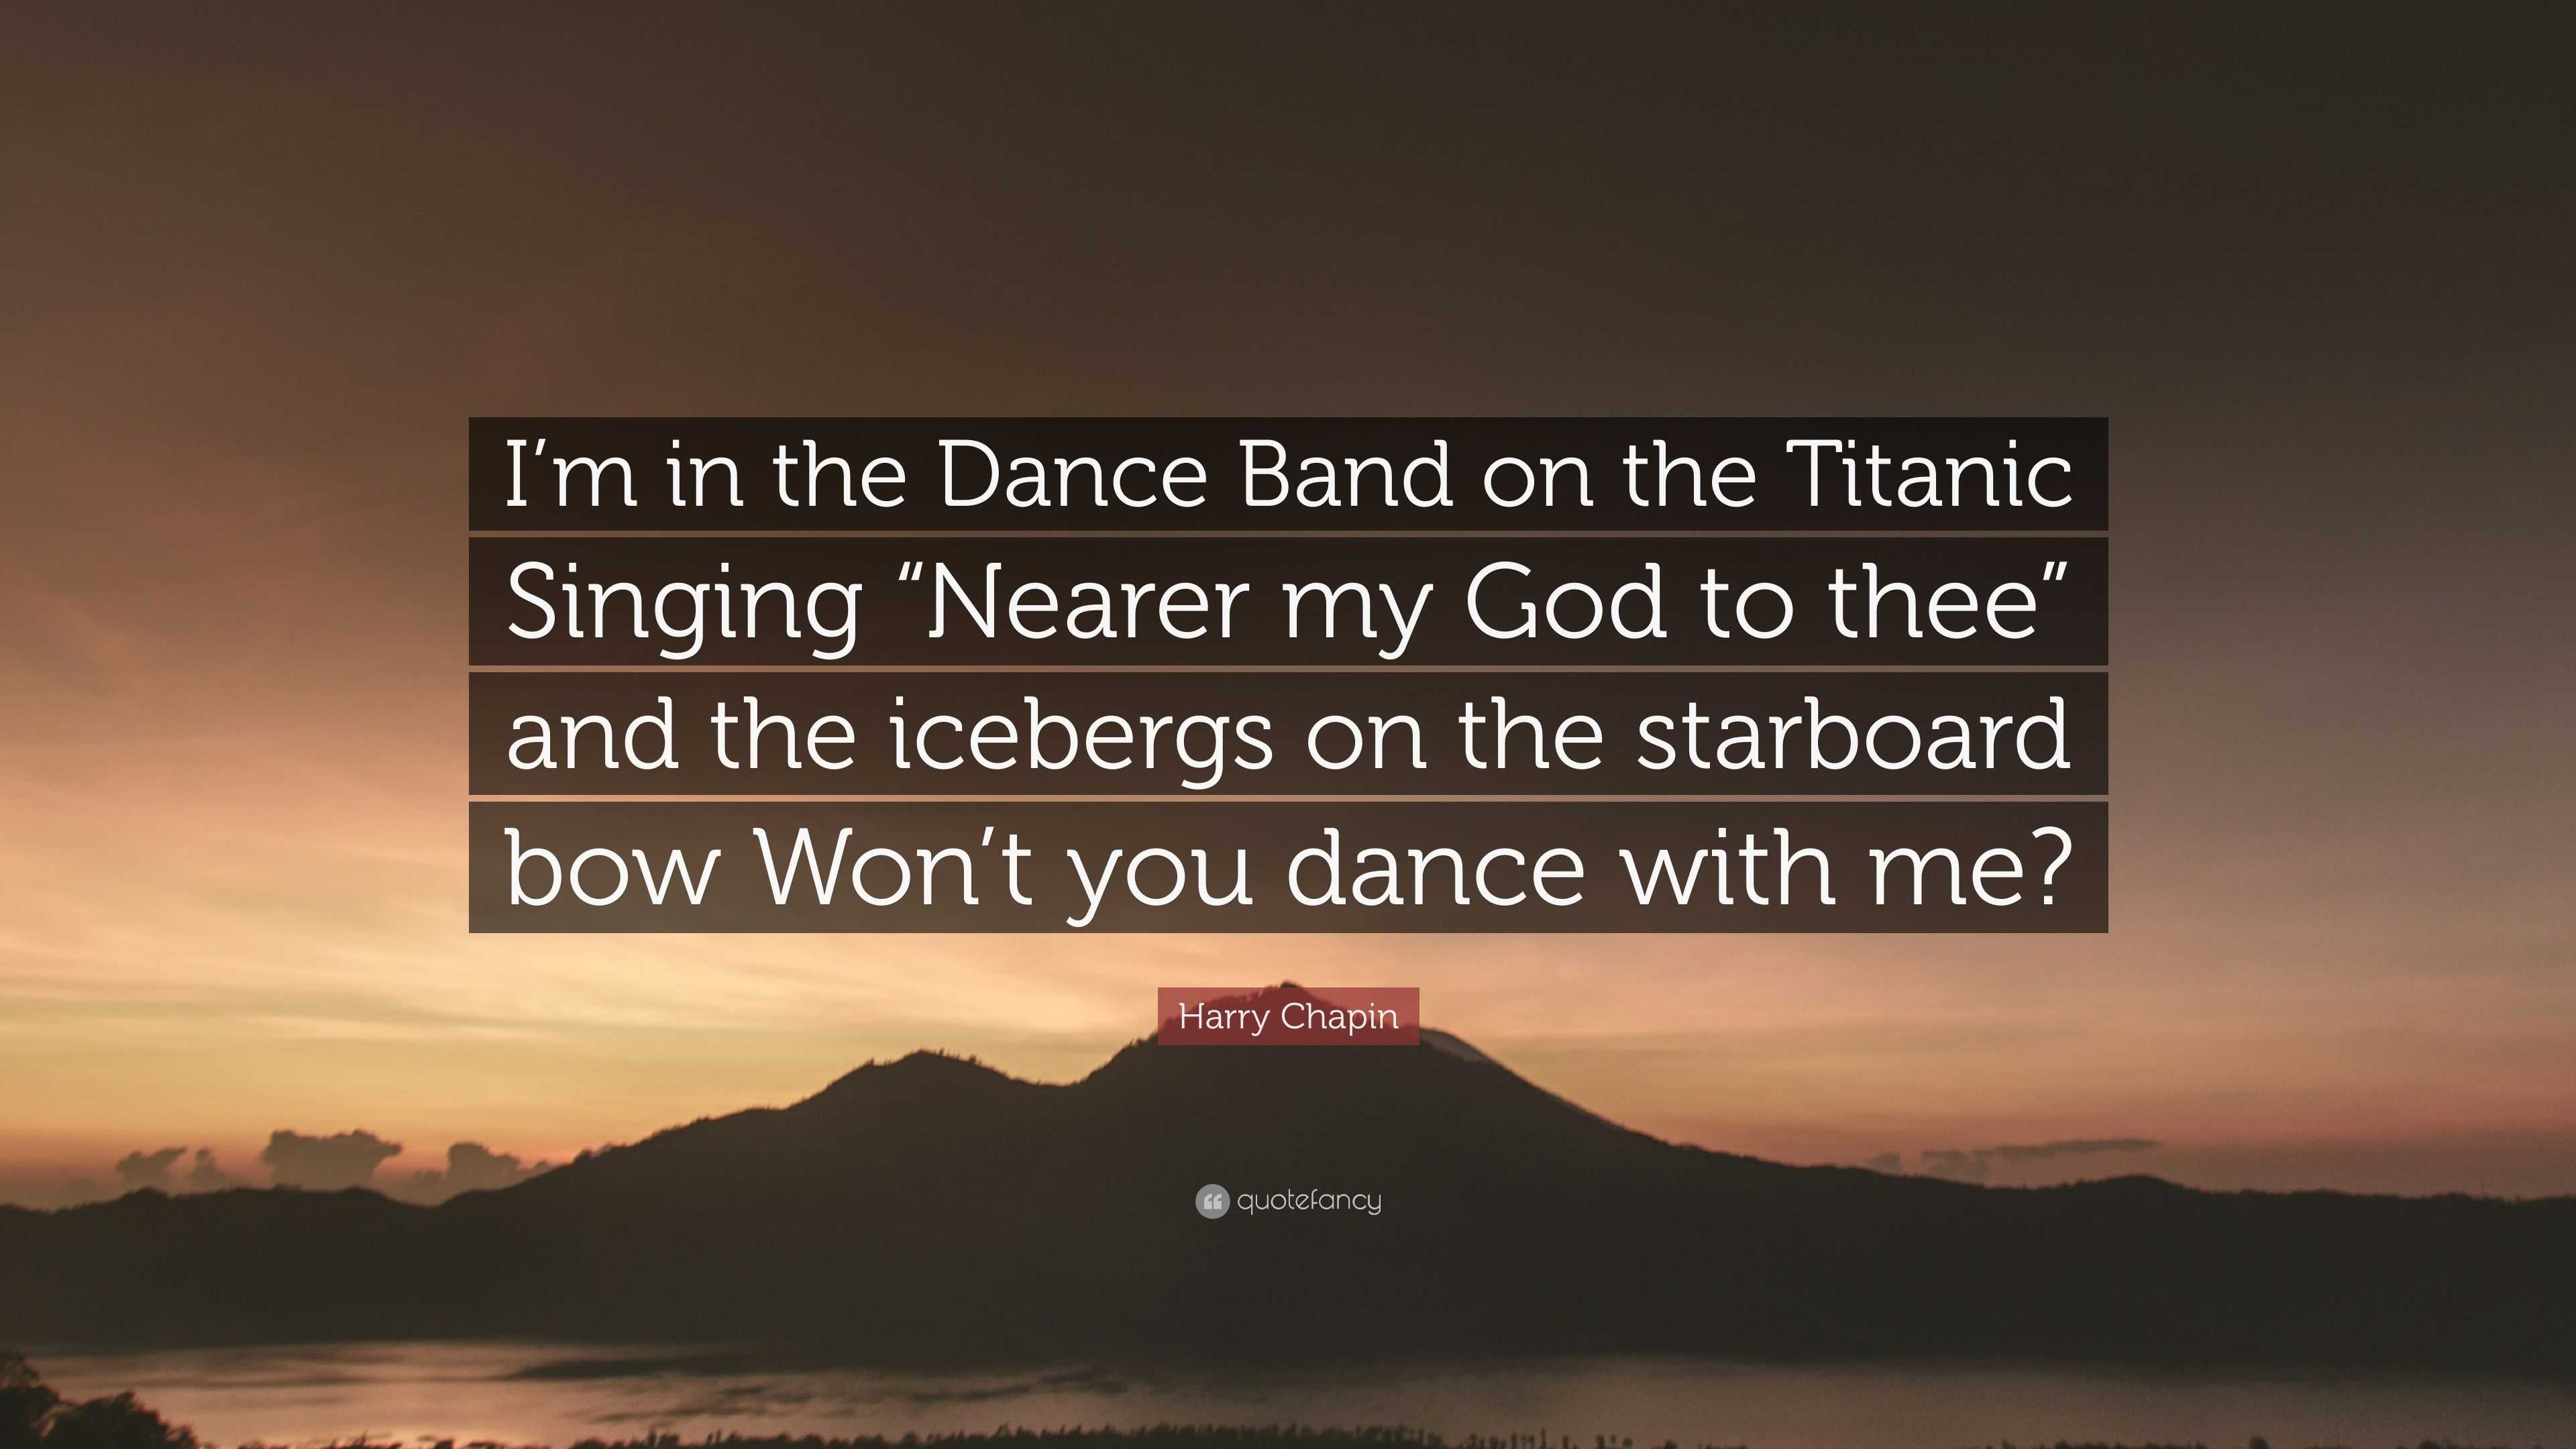 Harry Chapin Quote: “I'm in the Dance Band on the Titanic Singing “Nearer  my God to thee” and the icebergs on the starboard bow Won't you dan...”